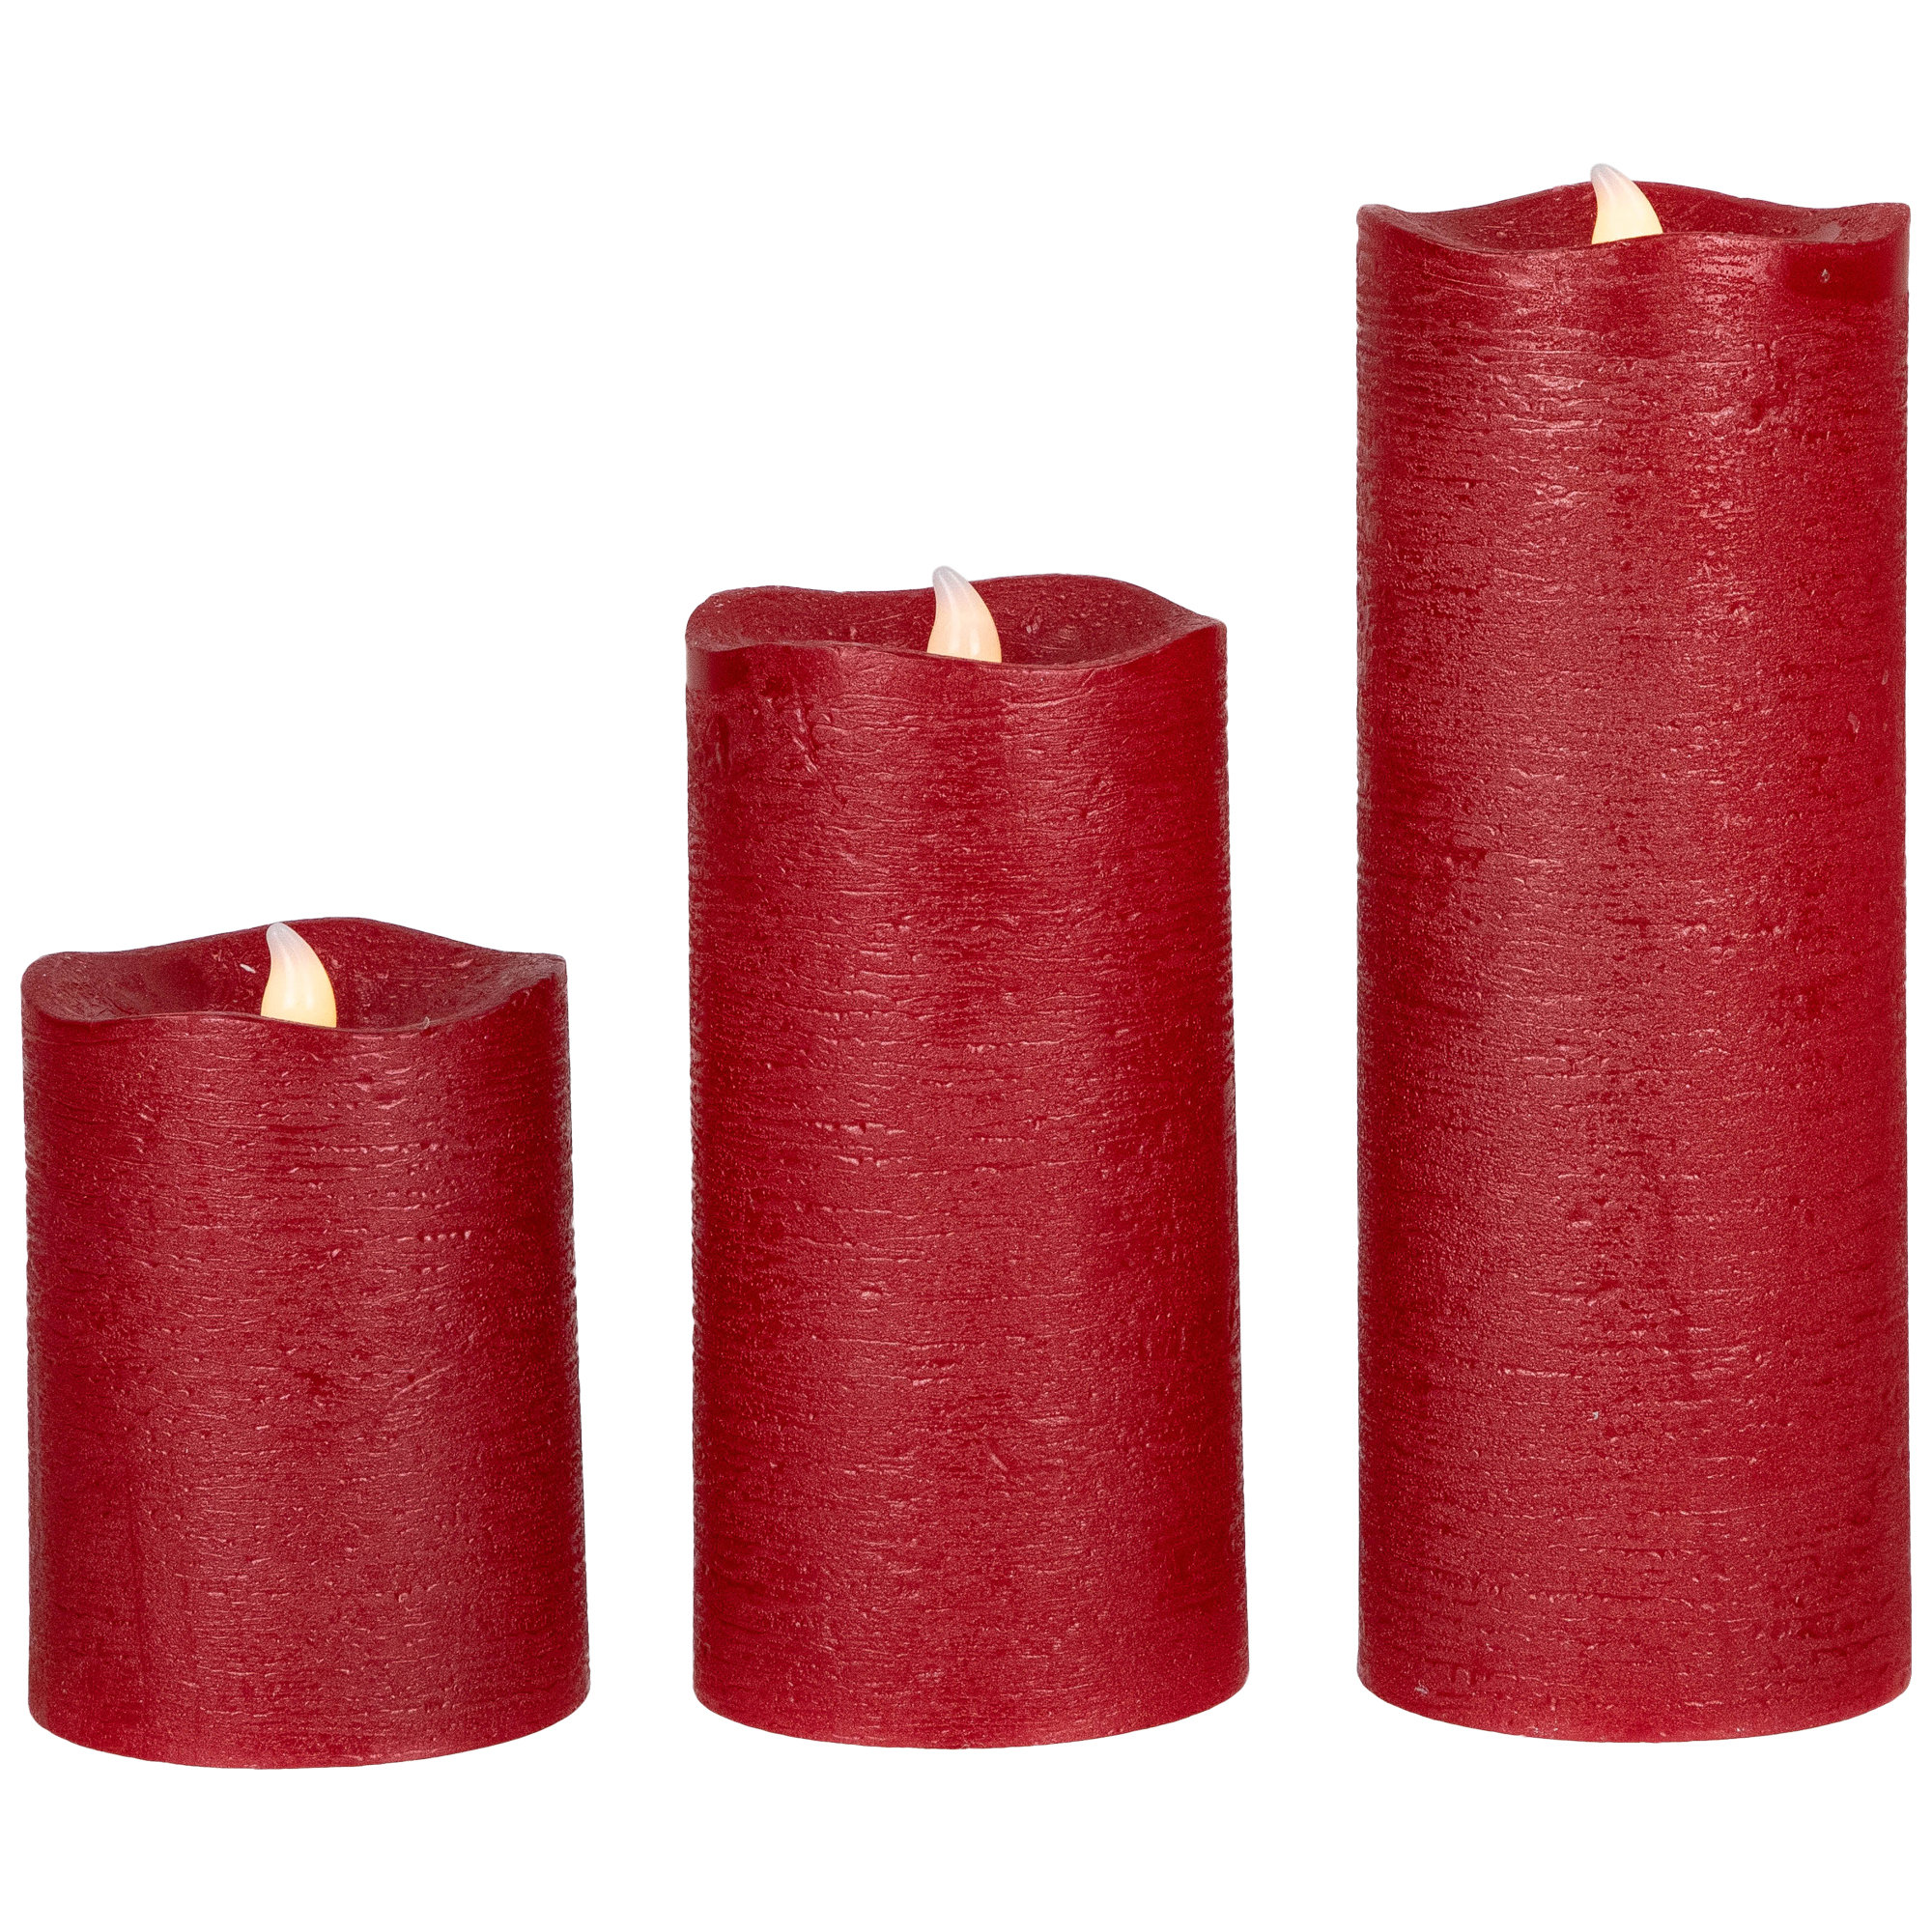 5 Wide by 6, 8 & 10 Inches Tall Flameless Heart Candles